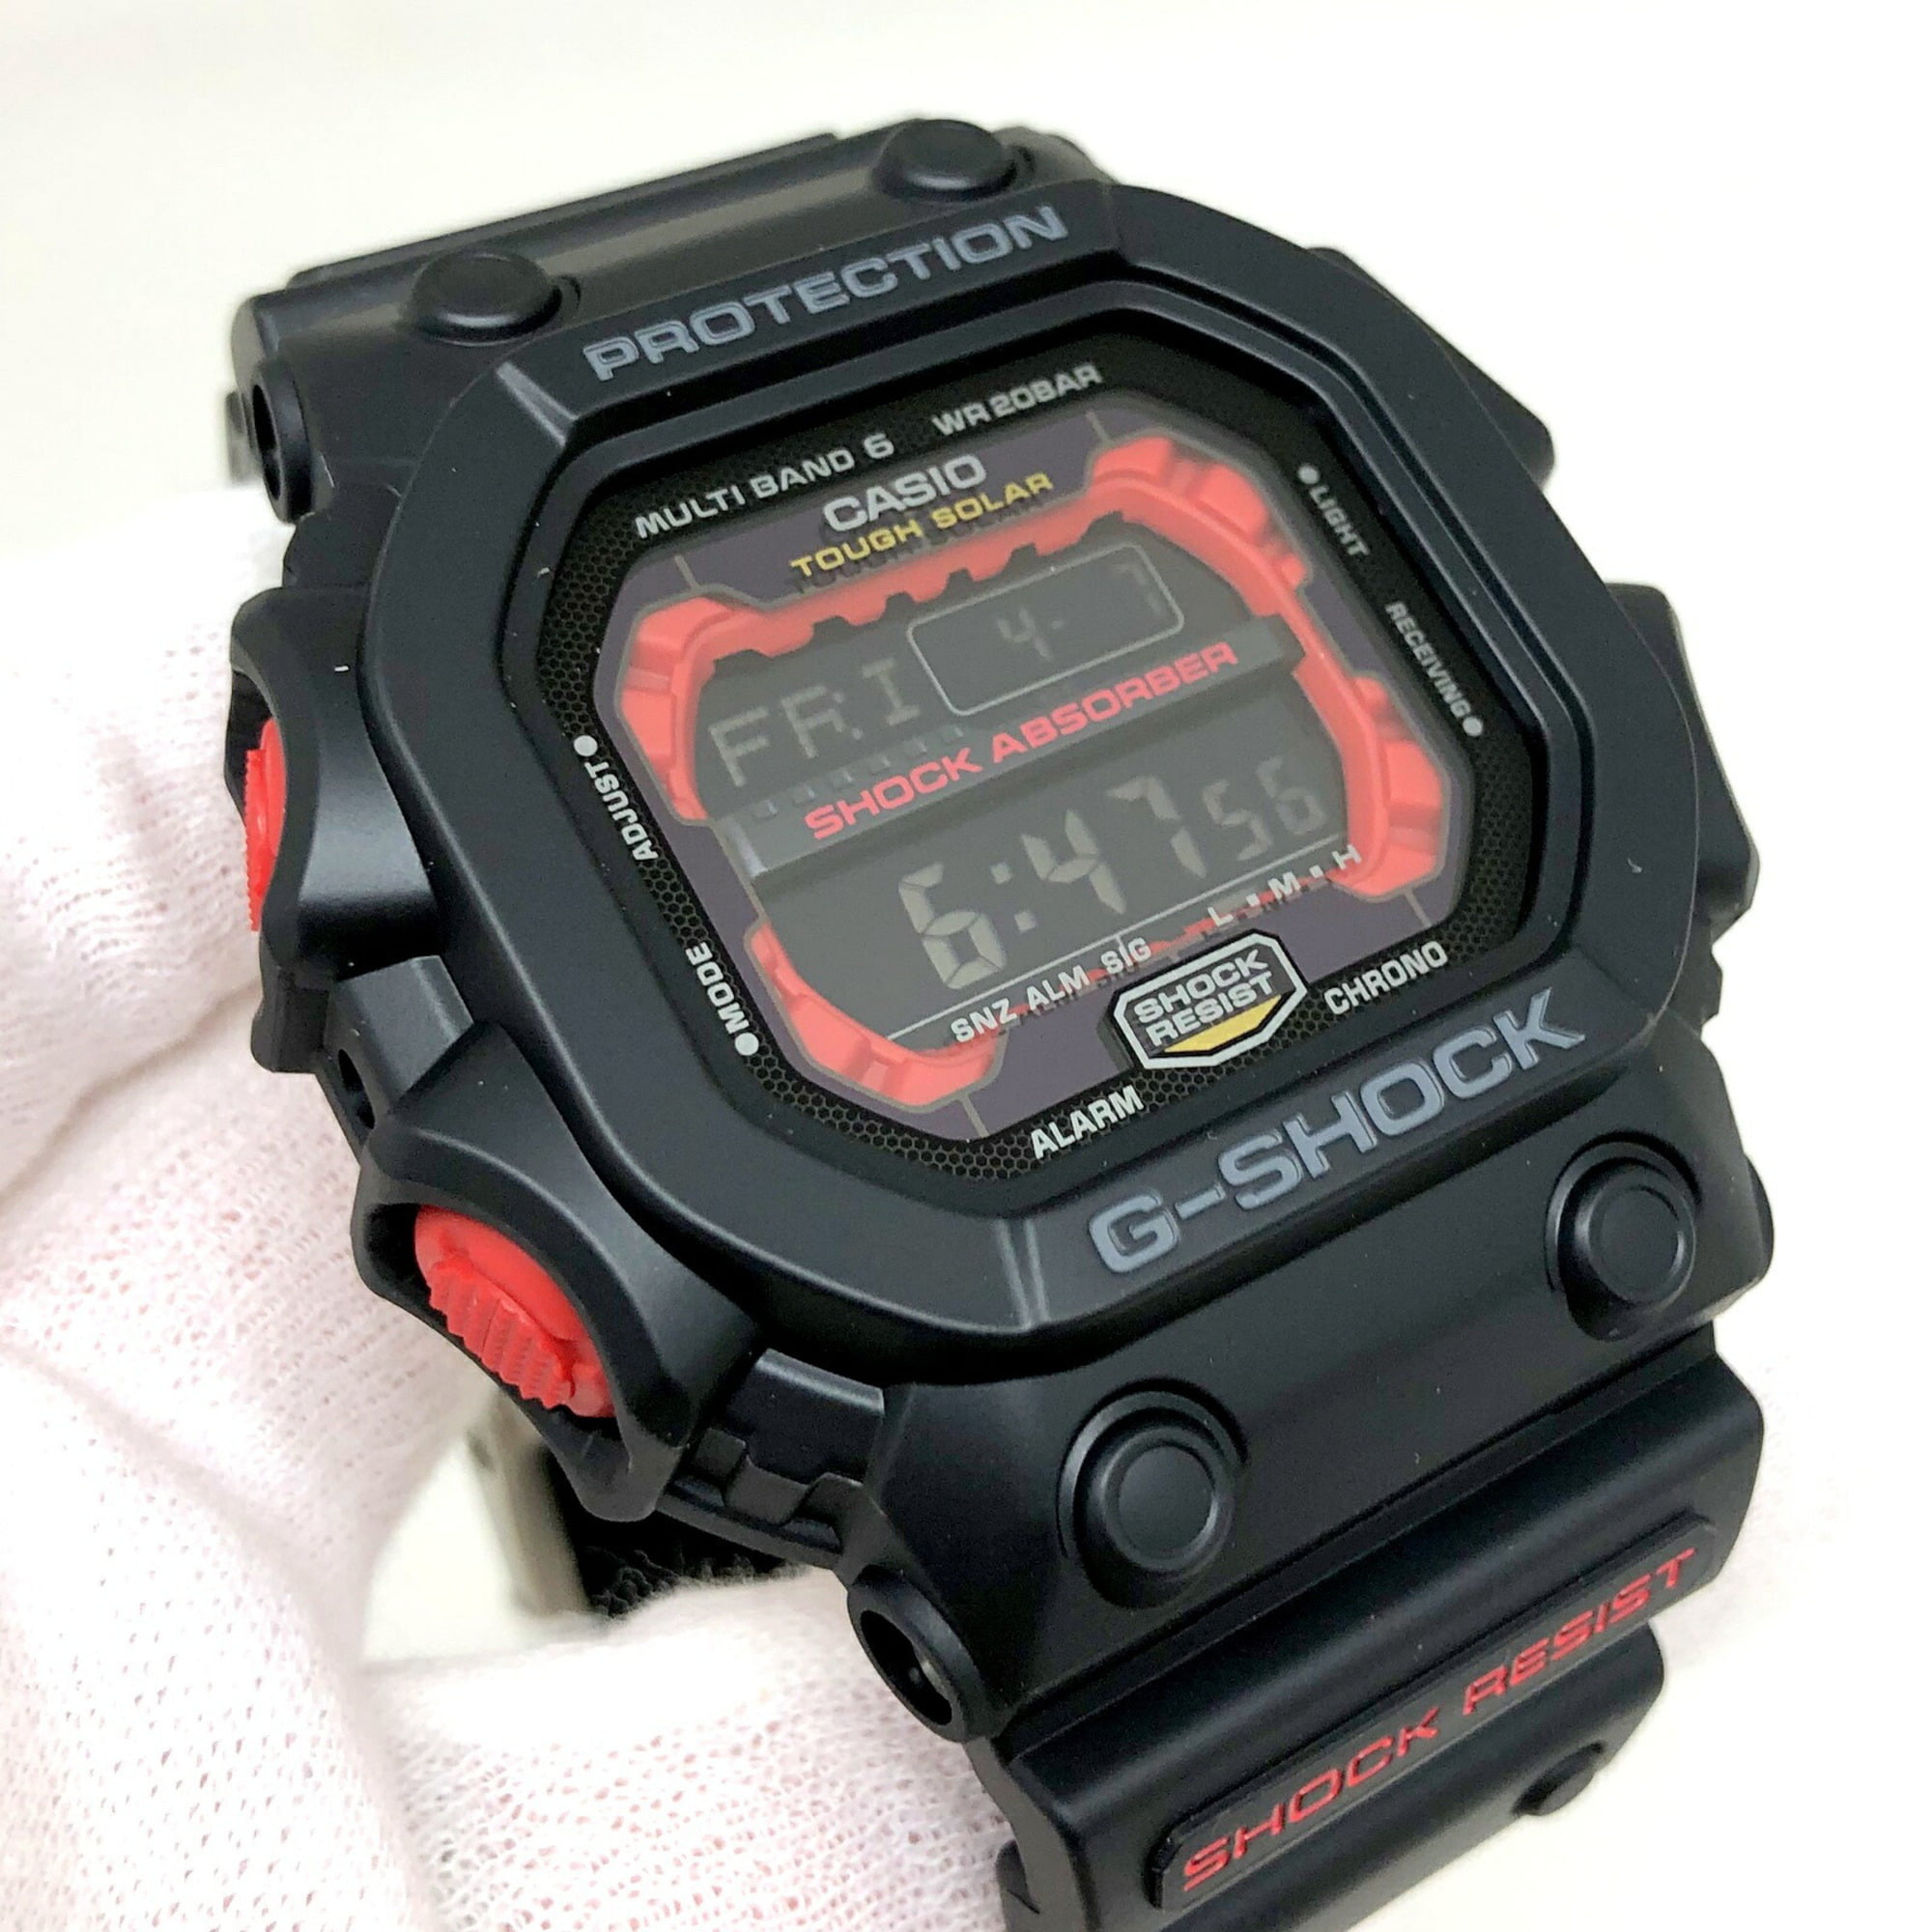 maling Airfield Reporter Authenticated Used G-SHOCK G shock CASIO Casio watch GXW-56-1A big case  face square digital tough solar electric wave world time GX series black  red men - Walmart.com